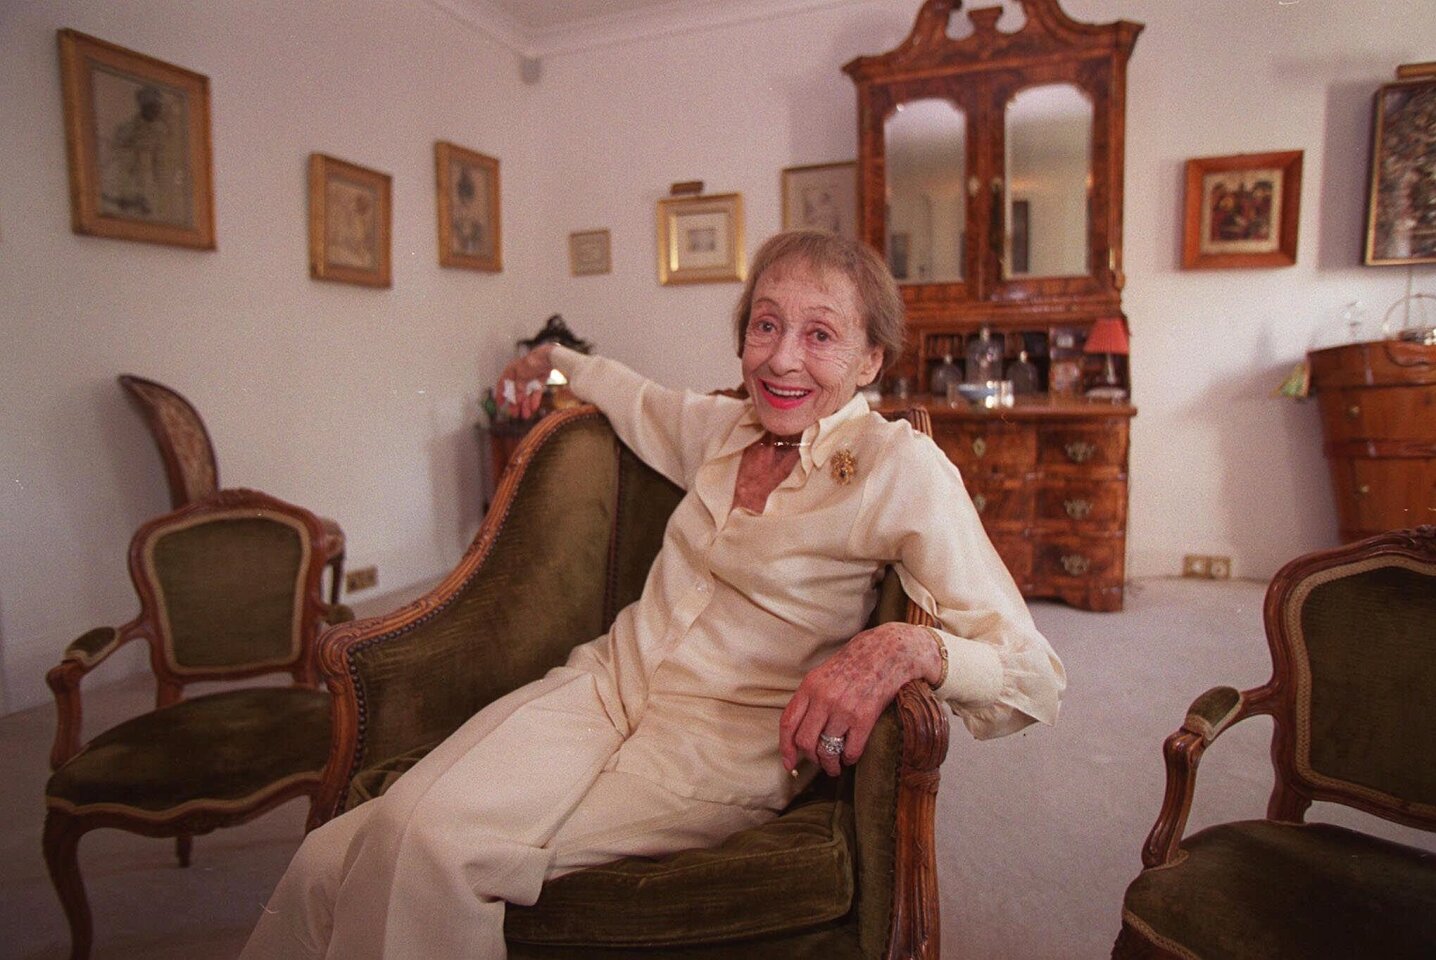 Rainer poses in her central London apartment on July 29, 1999. She died on Dec. 30, 2014.